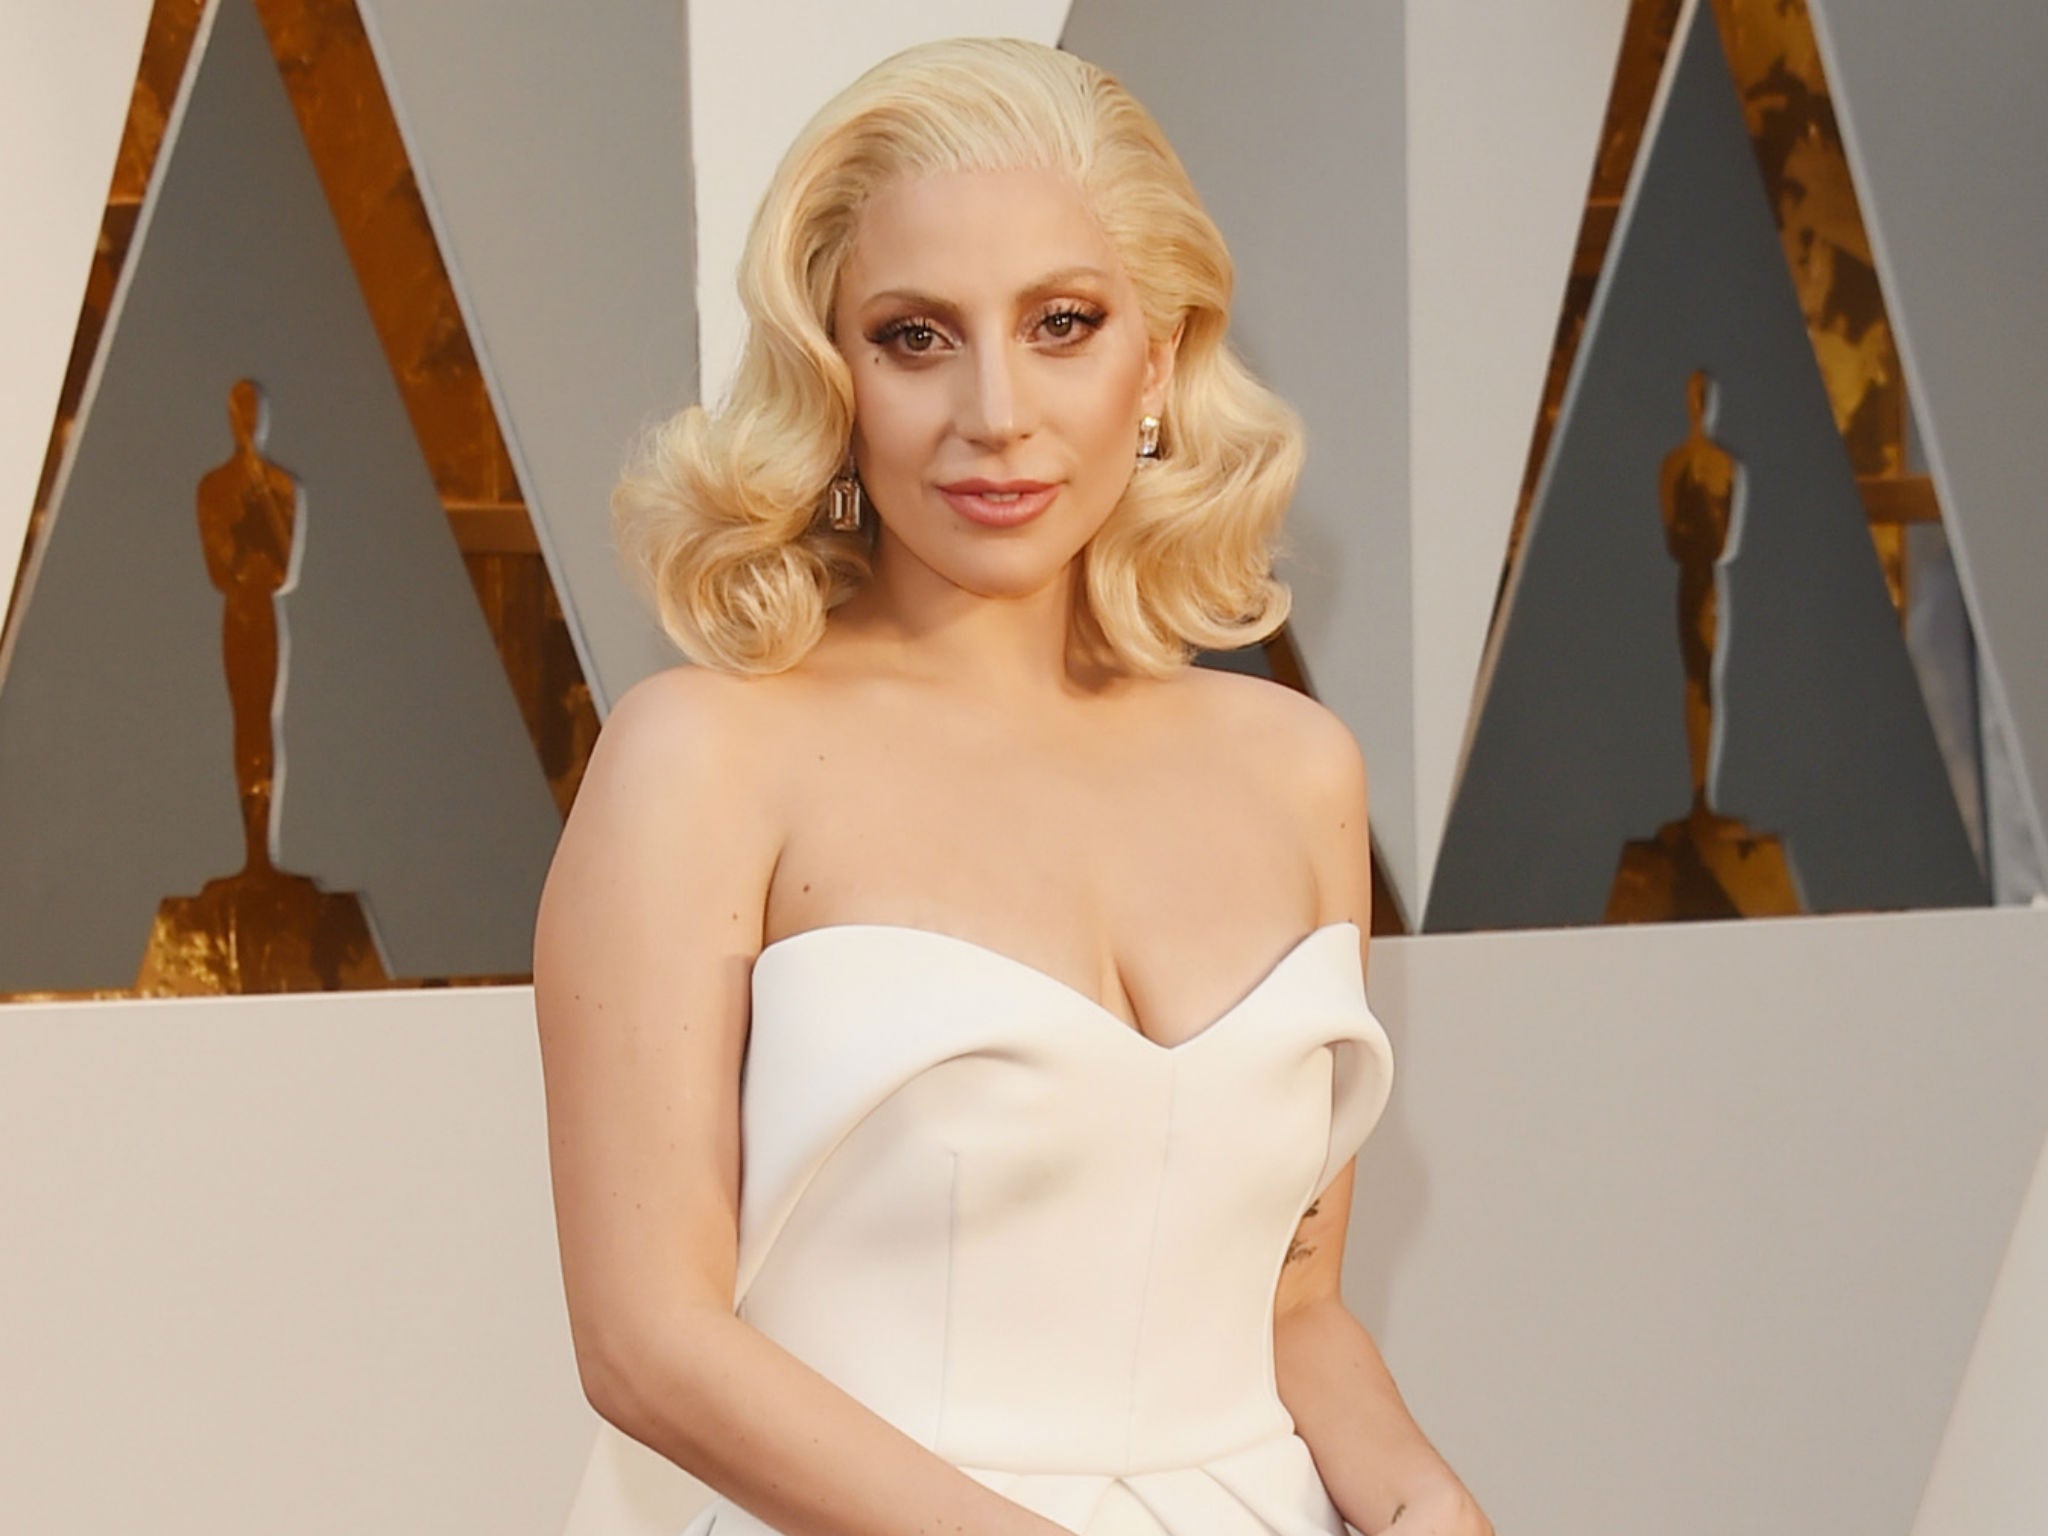 Pop star Lady Gaga at the 88th Annual Academy Awards. Her publicist has confirmed that she is taking medication to manage anxiety and depression